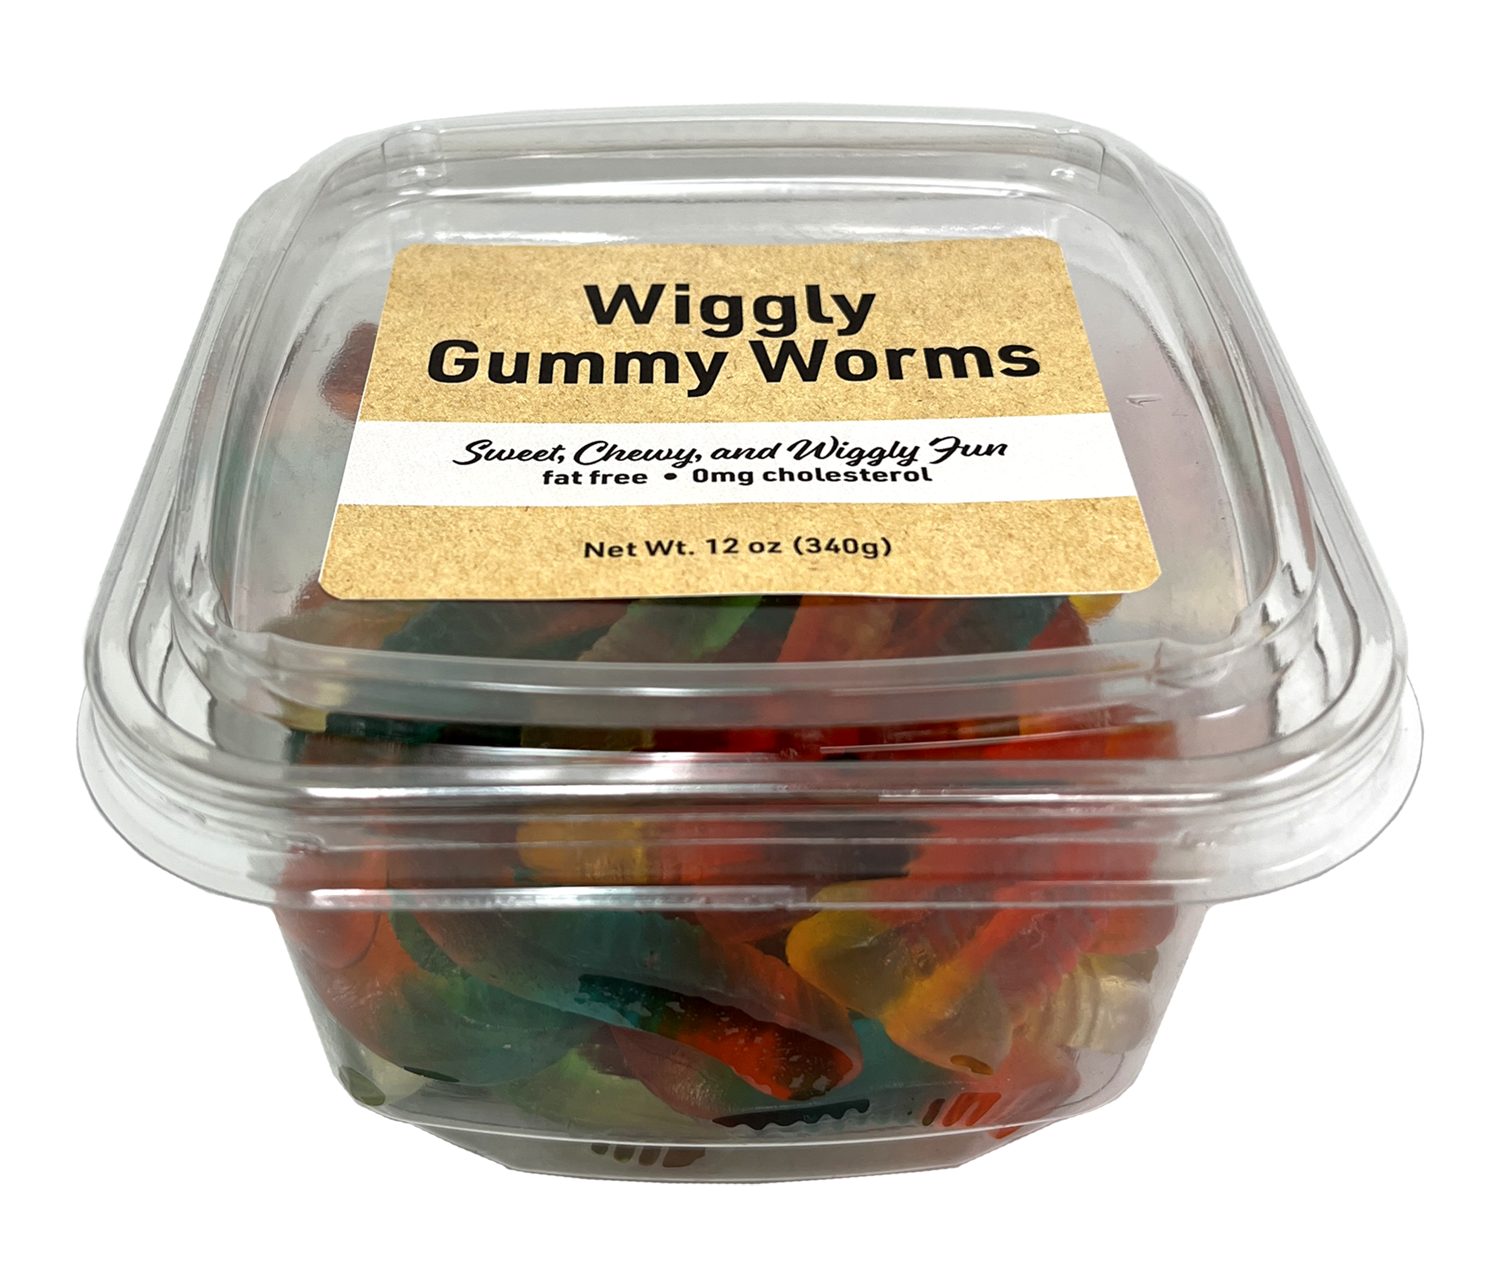 Wiggly Gummy Worms, 12 oz Container